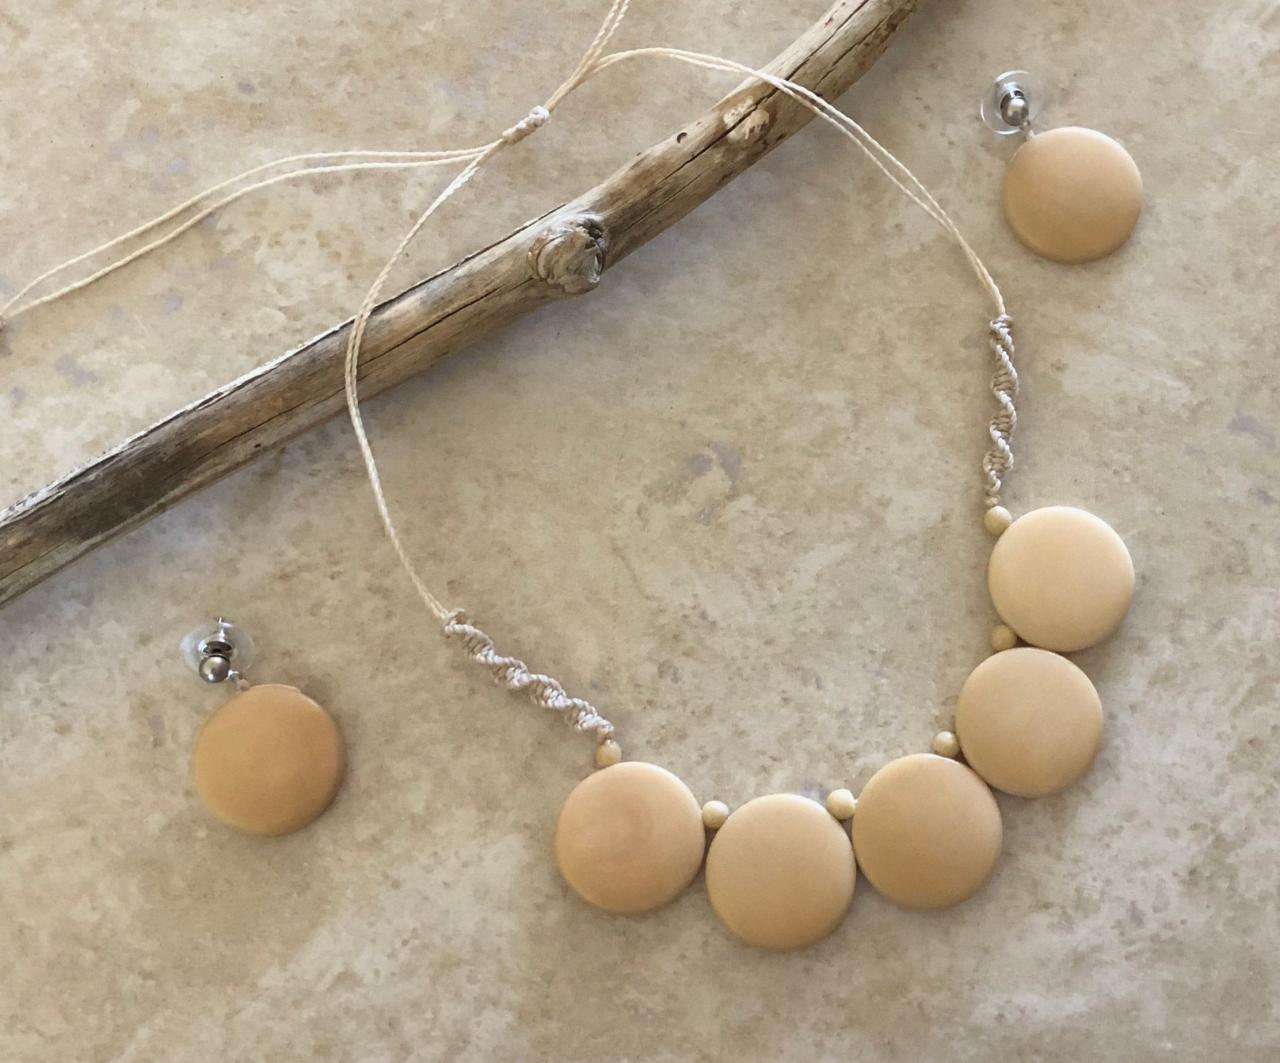 Natural Necklace and Earrings, Round Shape Necklace, Minimalist Necklace, Geometric Necklace , Adjustable Neck, Vegan Neck, Seeds Necklace